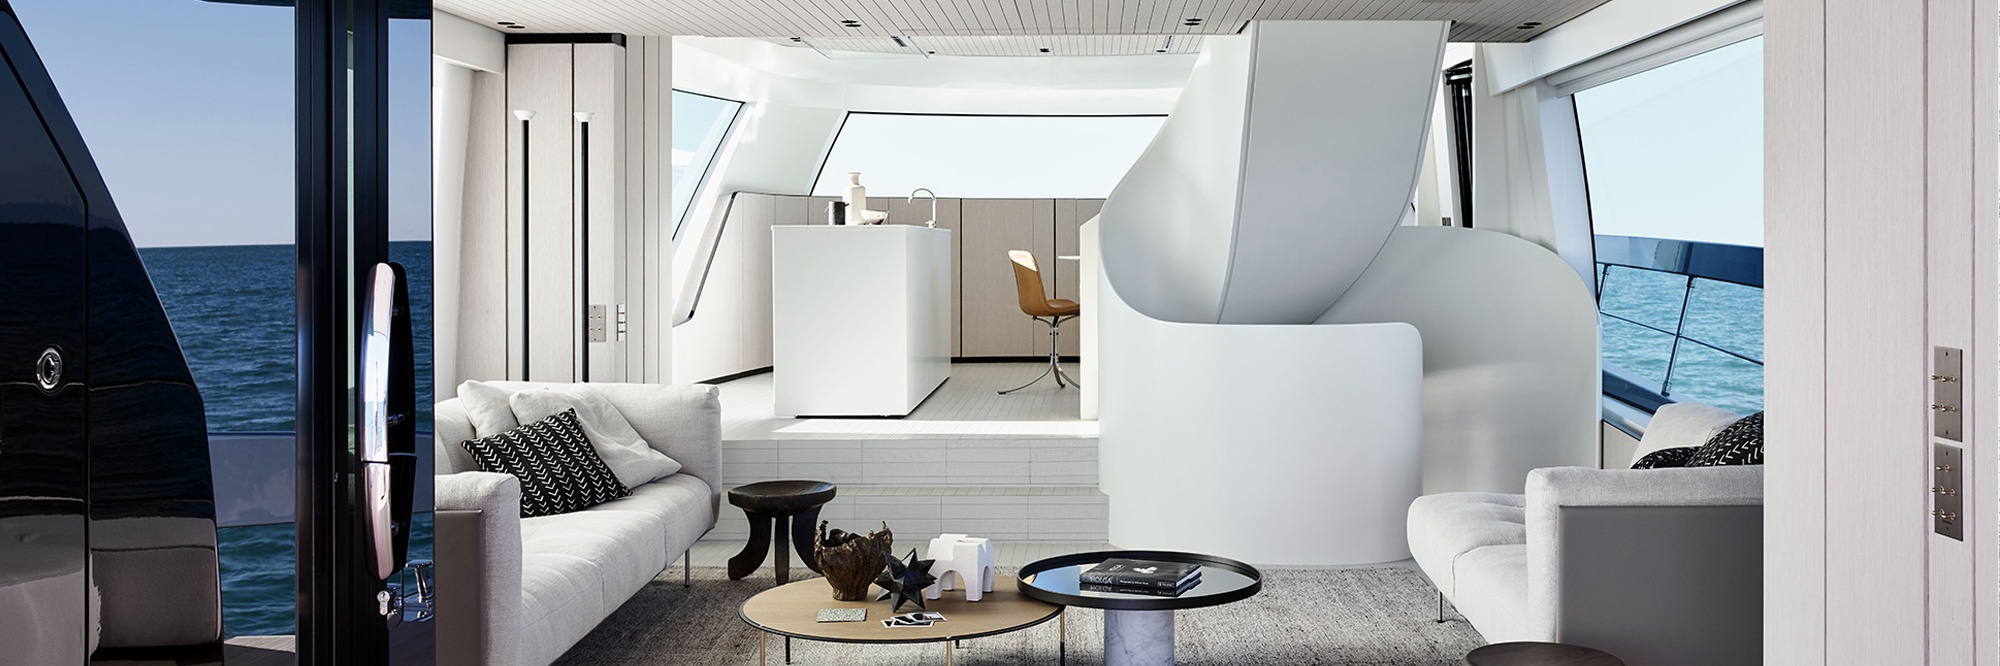 Superyacht Style - The Chic Interiors Designed By Renowned Designers